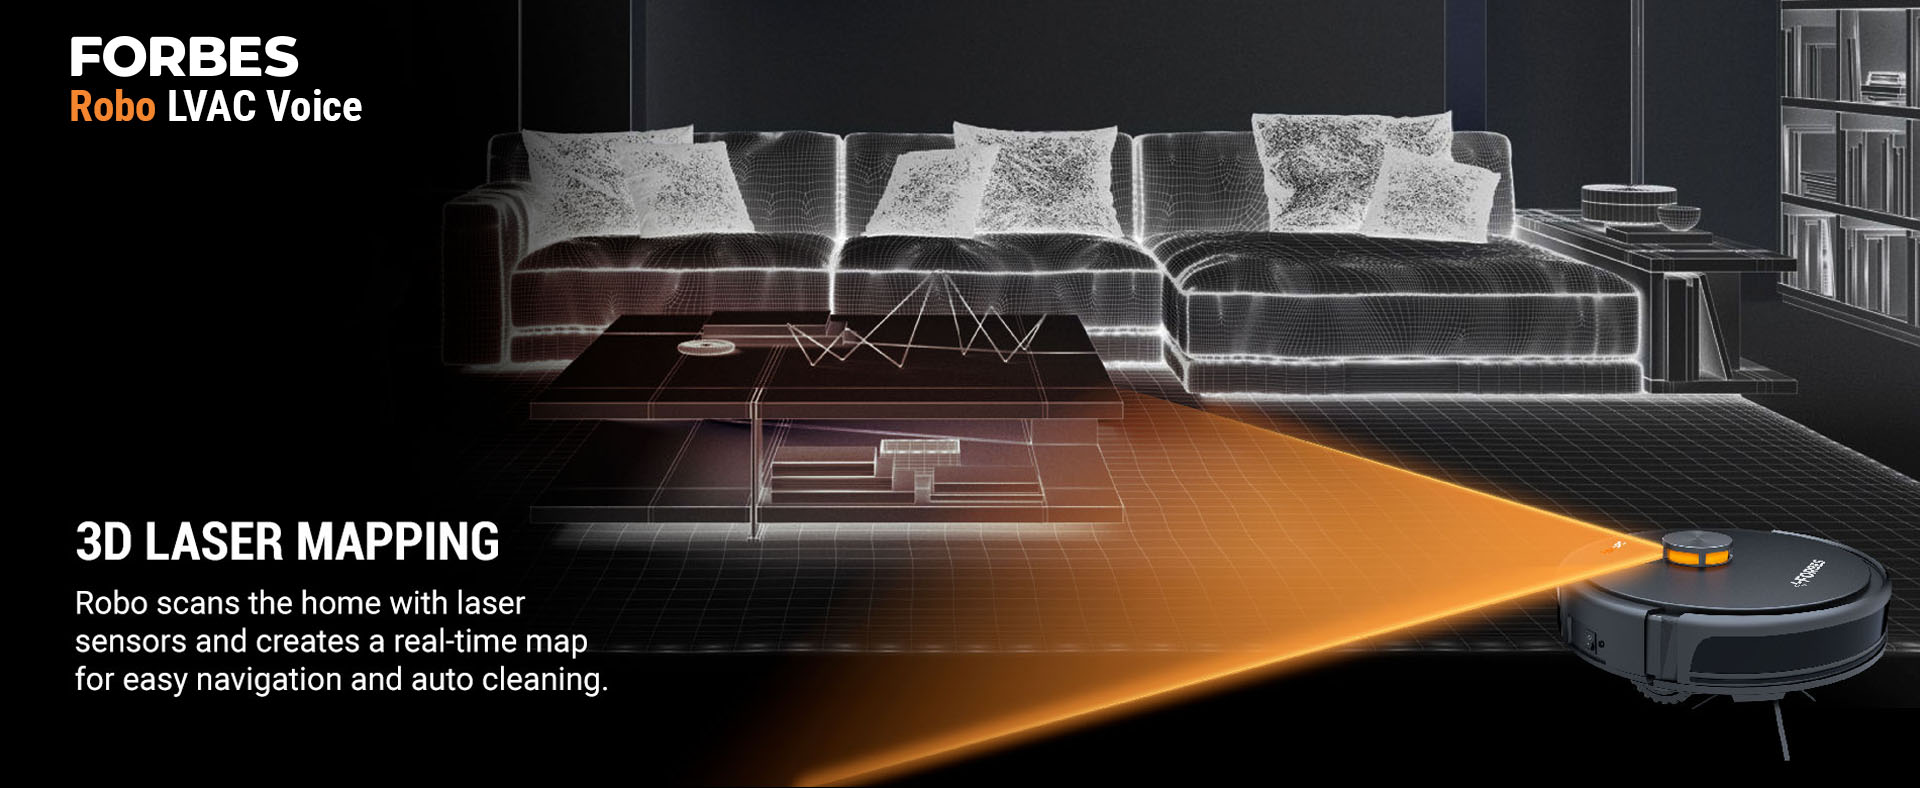 Robo scans the home with laser sensors and creates a real-time map for easy navigation and auto cleaning.